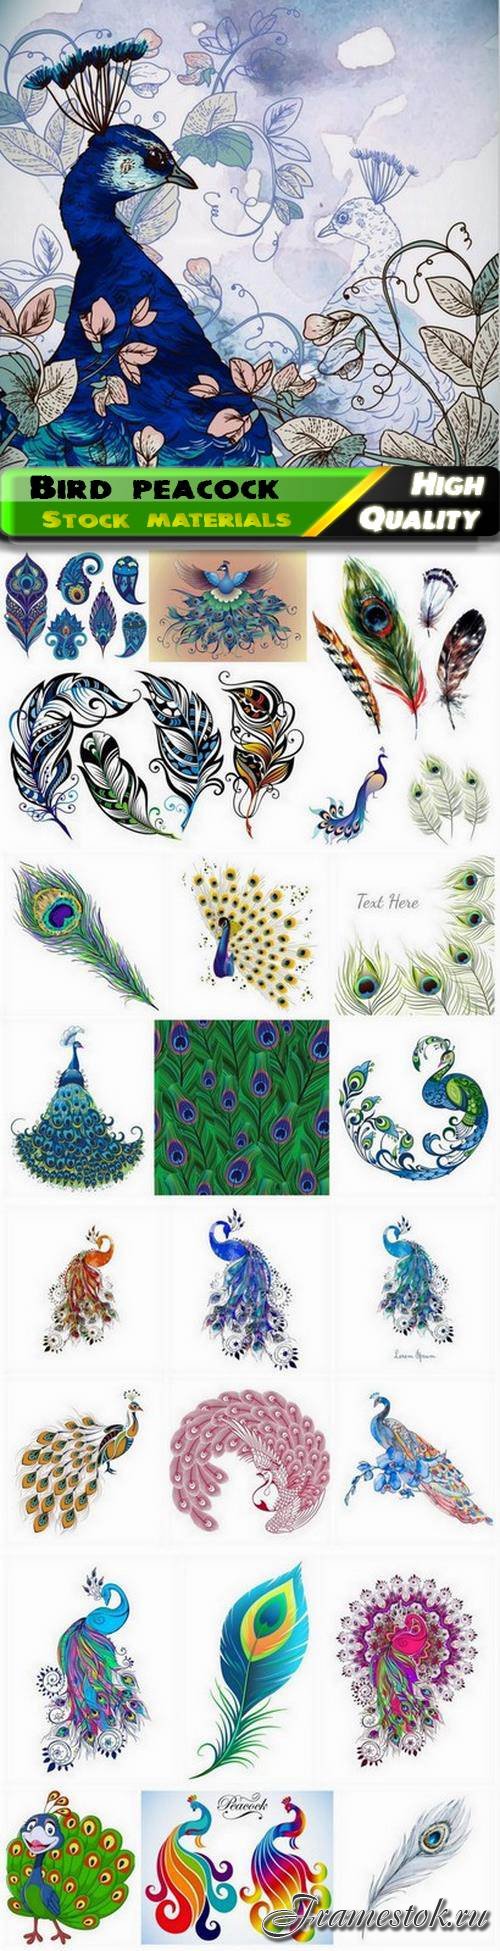 Bird peacock illustration with abstract colorful feathers - 25 Eps